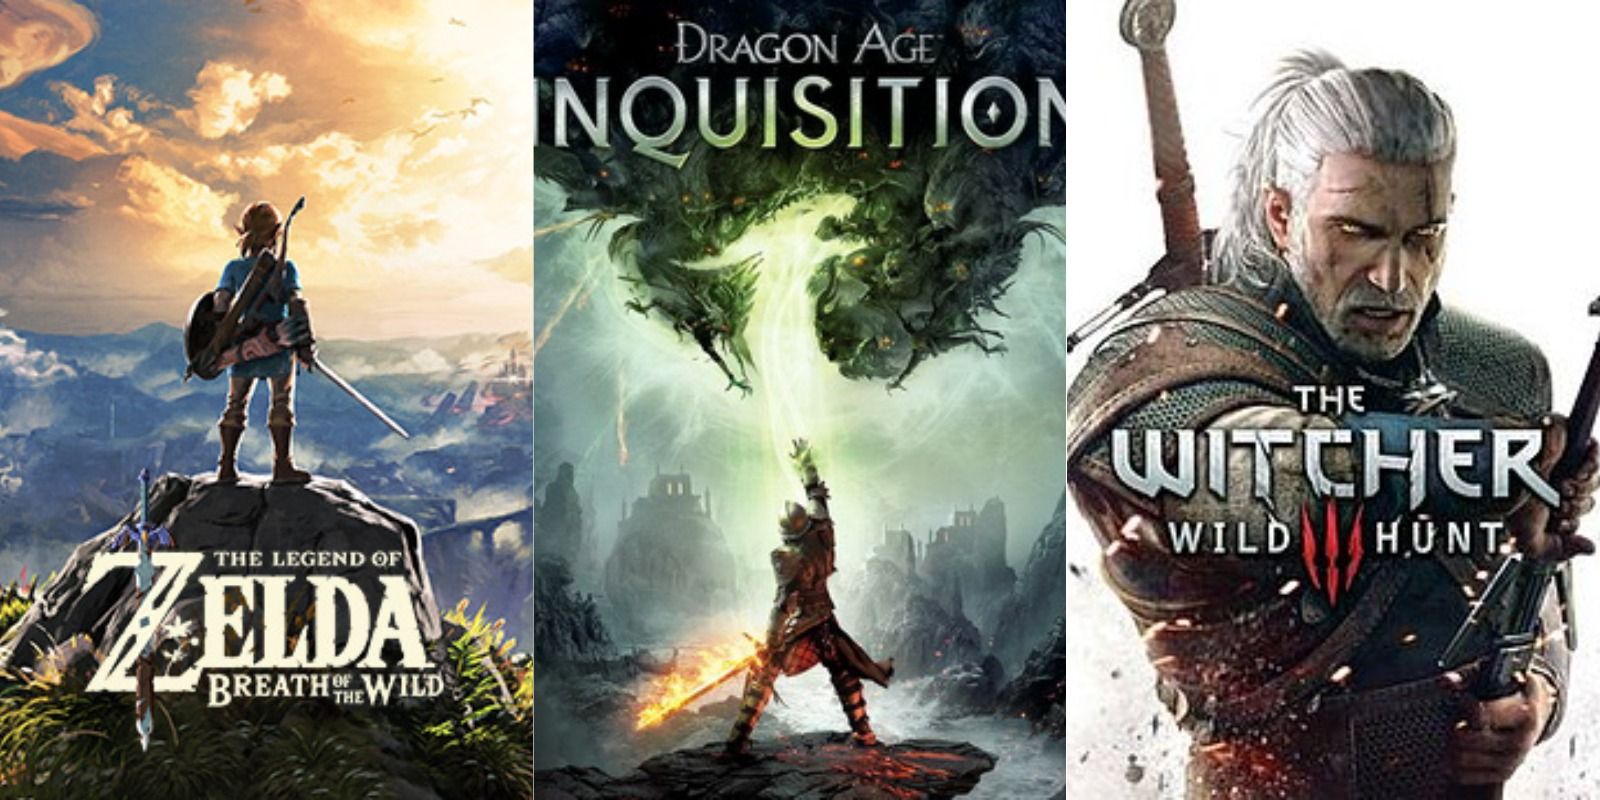 Legend of Zelda Breath of the Wild/Inquisition/The Witcher 3 game covers